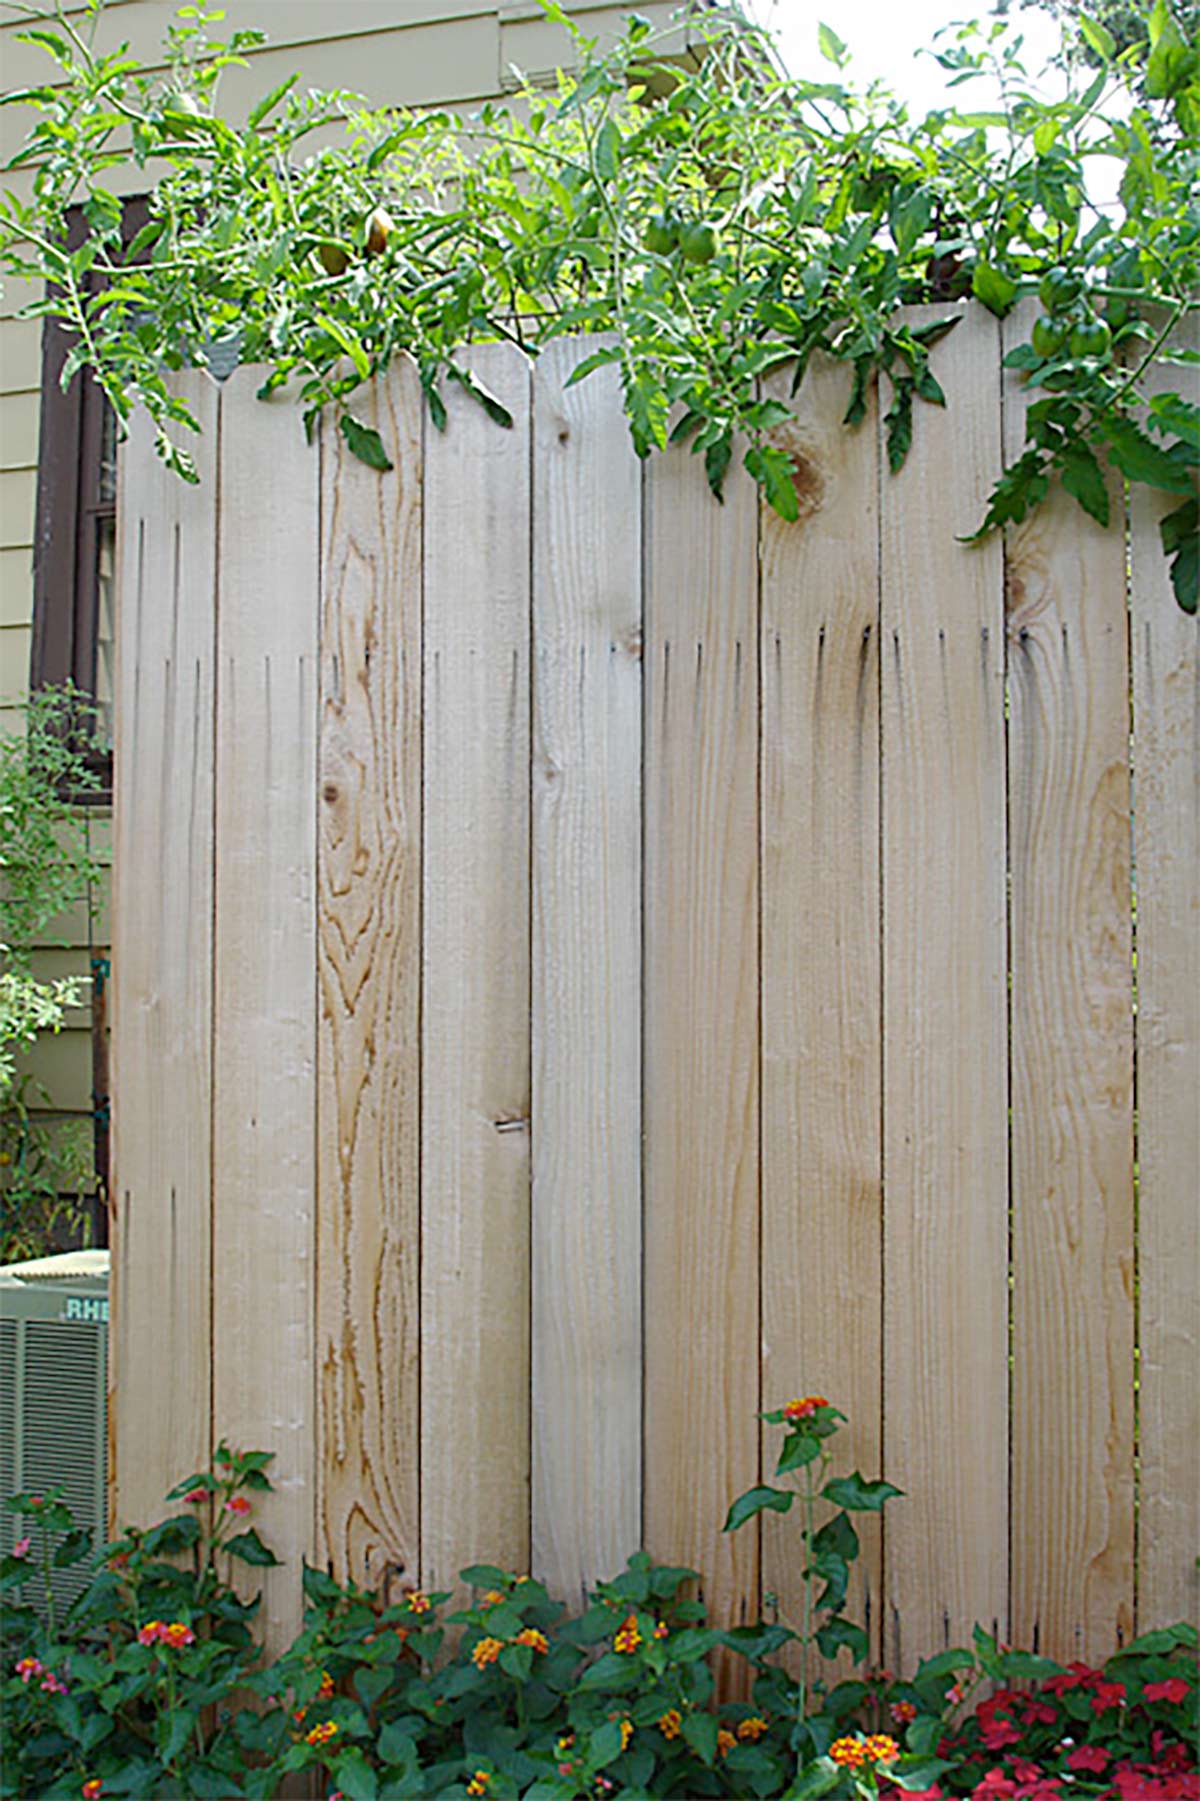 Tomato plants growing up and over a tall privacy fence.